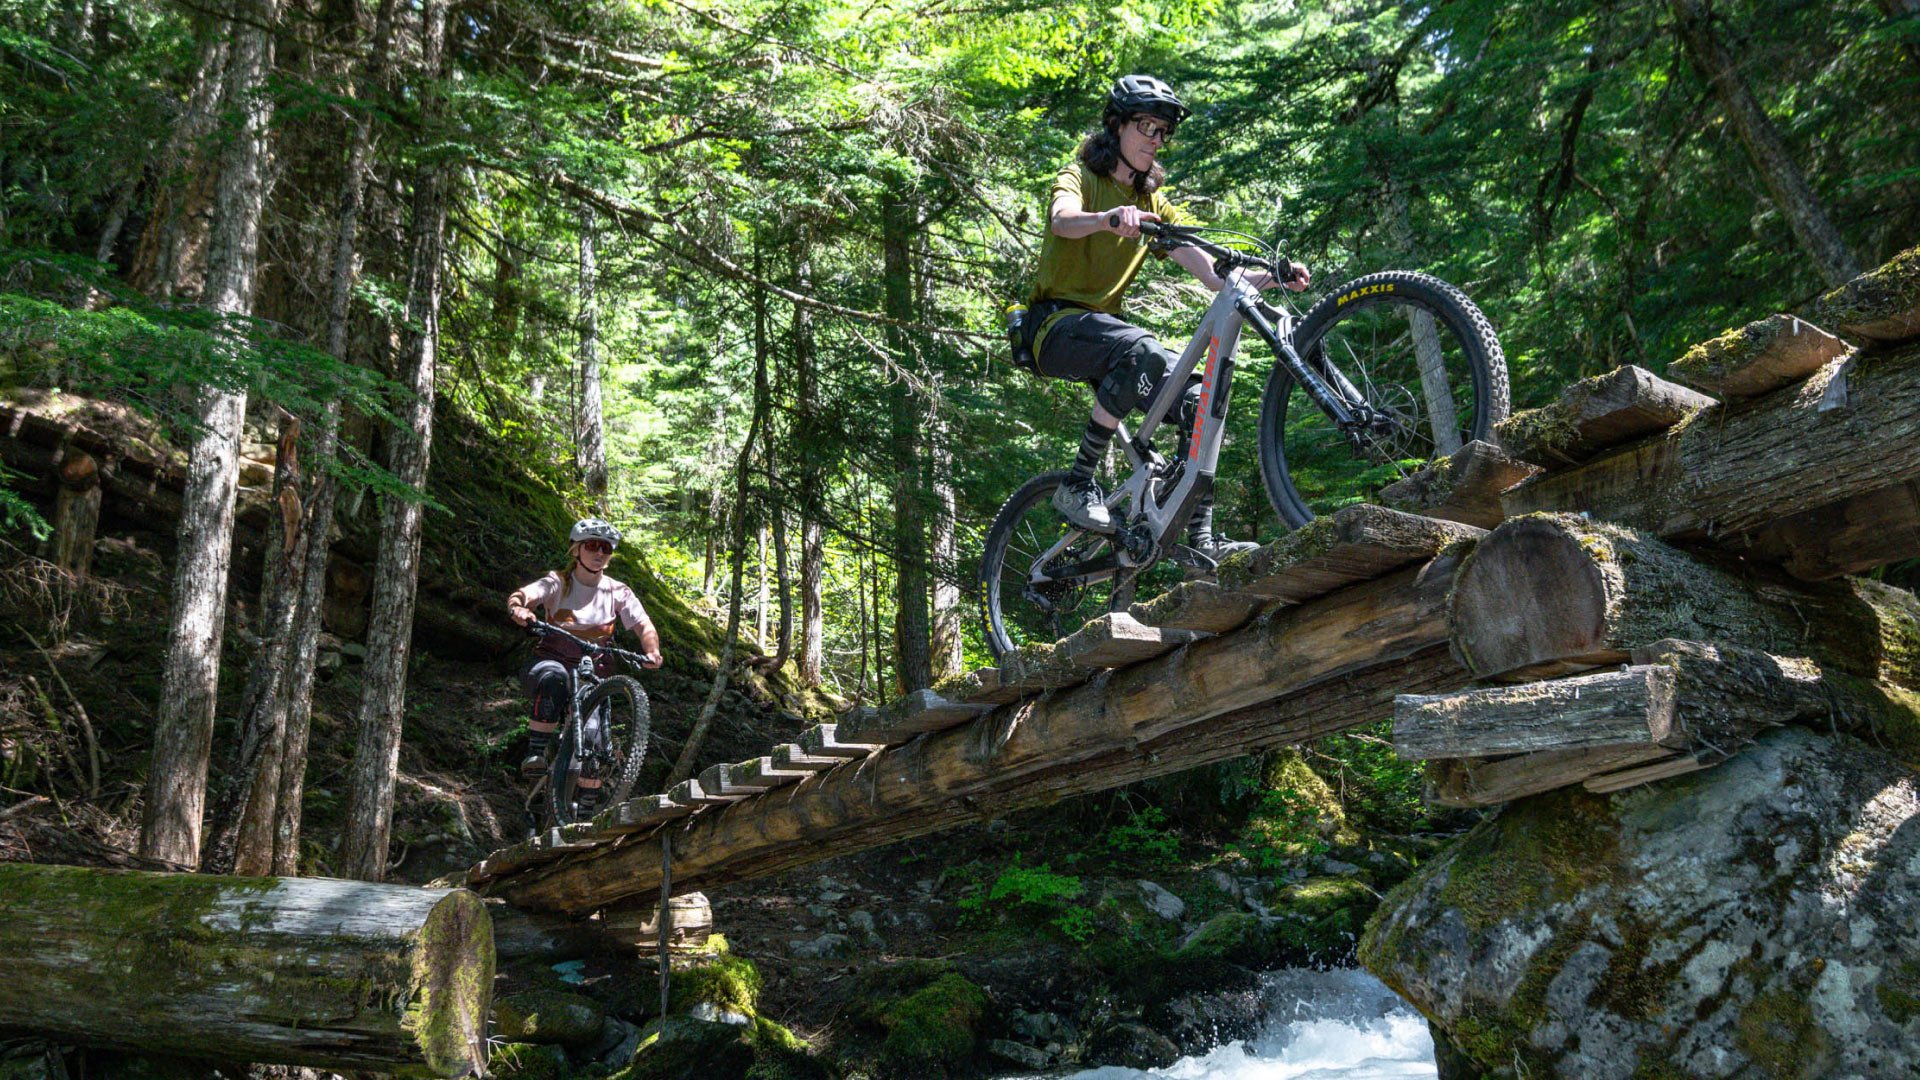 Test bikes and join us for exclusive events at Crankworx Whistler starting July 18th